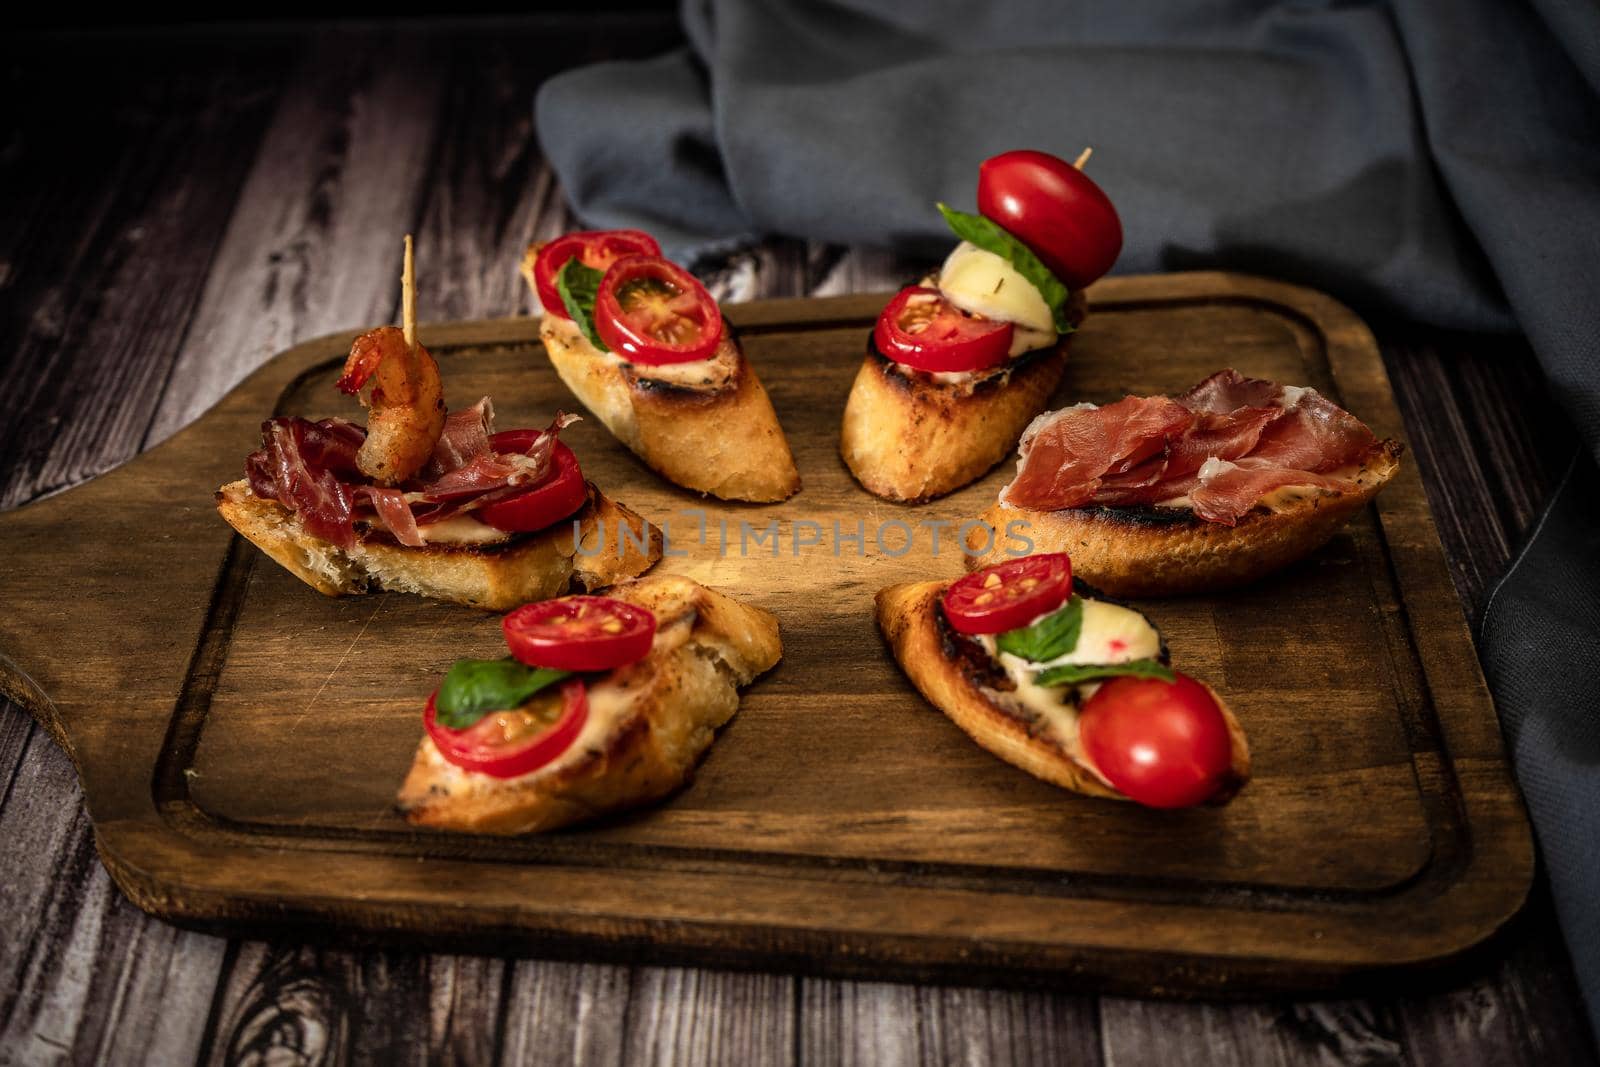 Arrangement of a selection of different tapas or bruschettas on a wooden board. Mediterranean food concept.